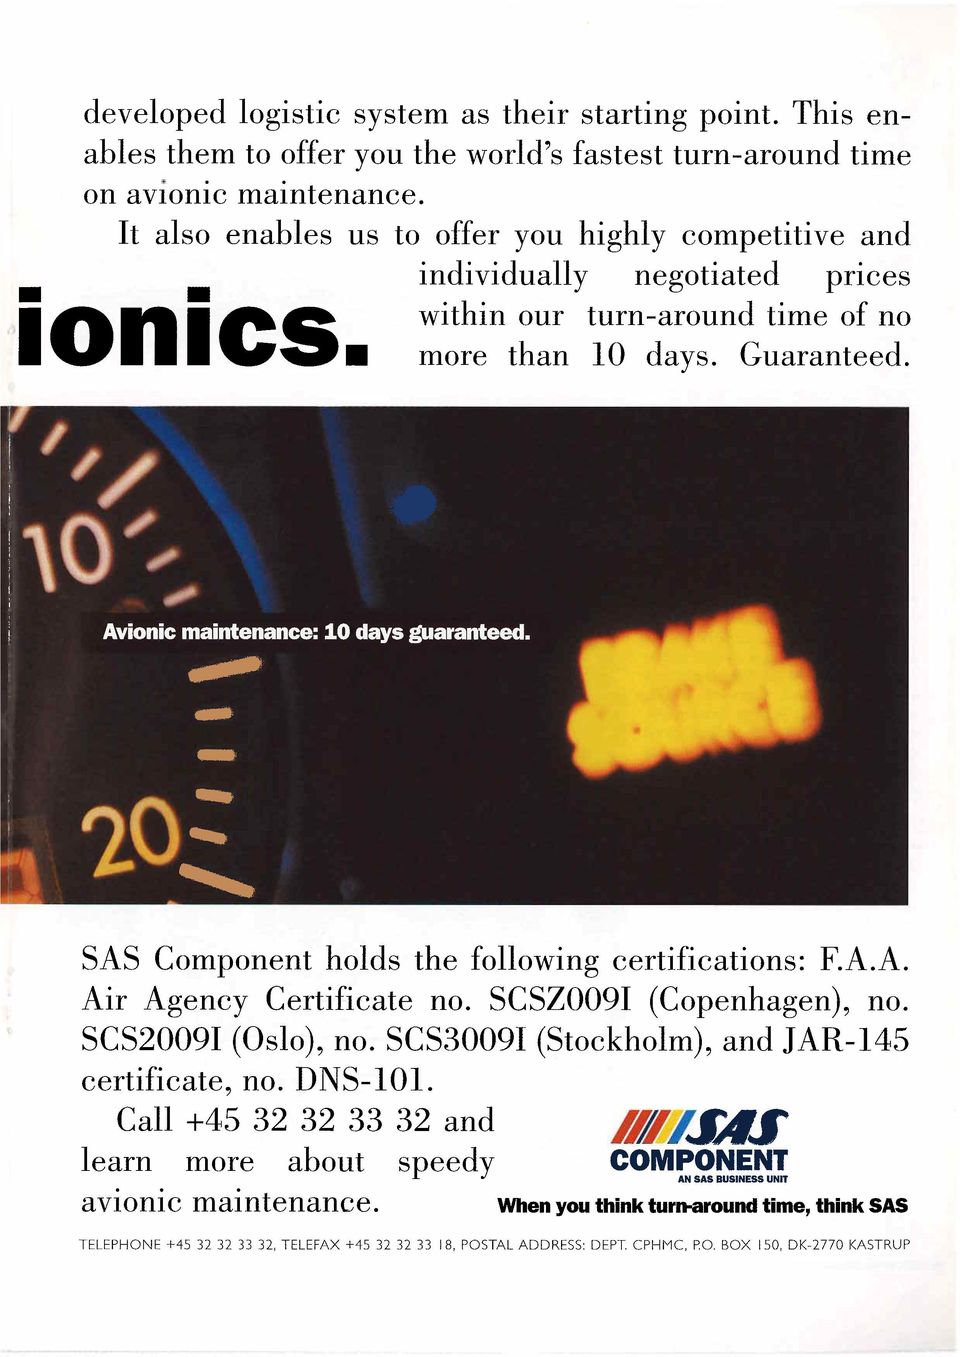 ' i SAS Component holds the following certifications: F.A.A. Air Agency Certificate no. SCSZ009I (Copenhagen), no. SCS2009I (Oslo), no. SCS3009I (Stockholm), and JAR-145 certificate, no.